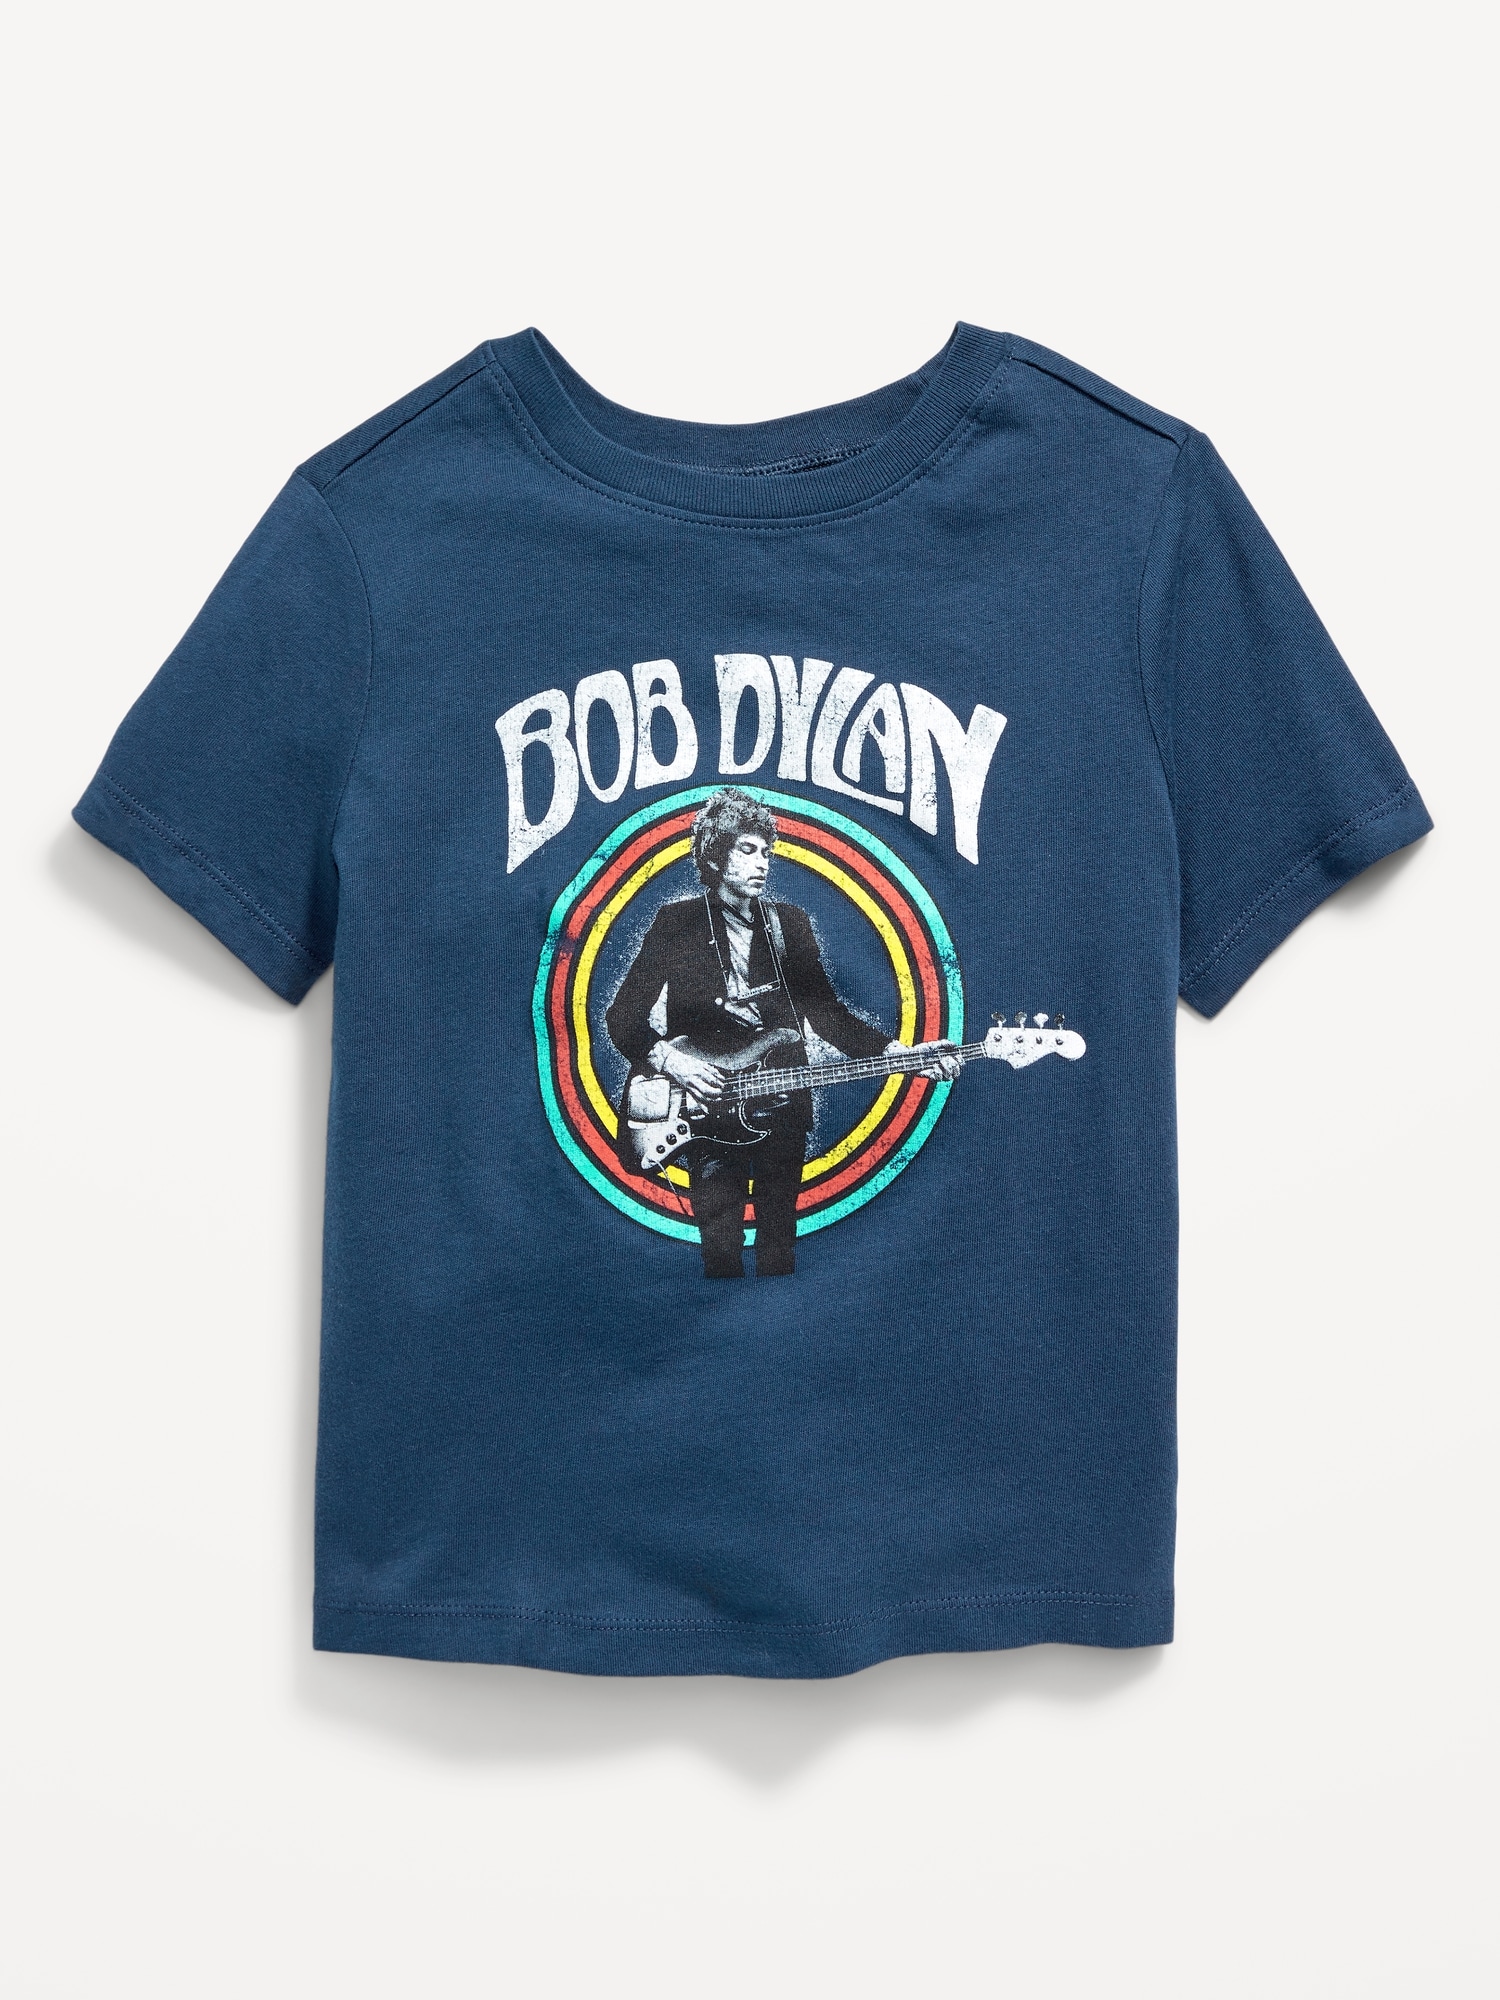 Unisex Bob Dylan™ Graphic T-Shirt Navy for Old | Toddler